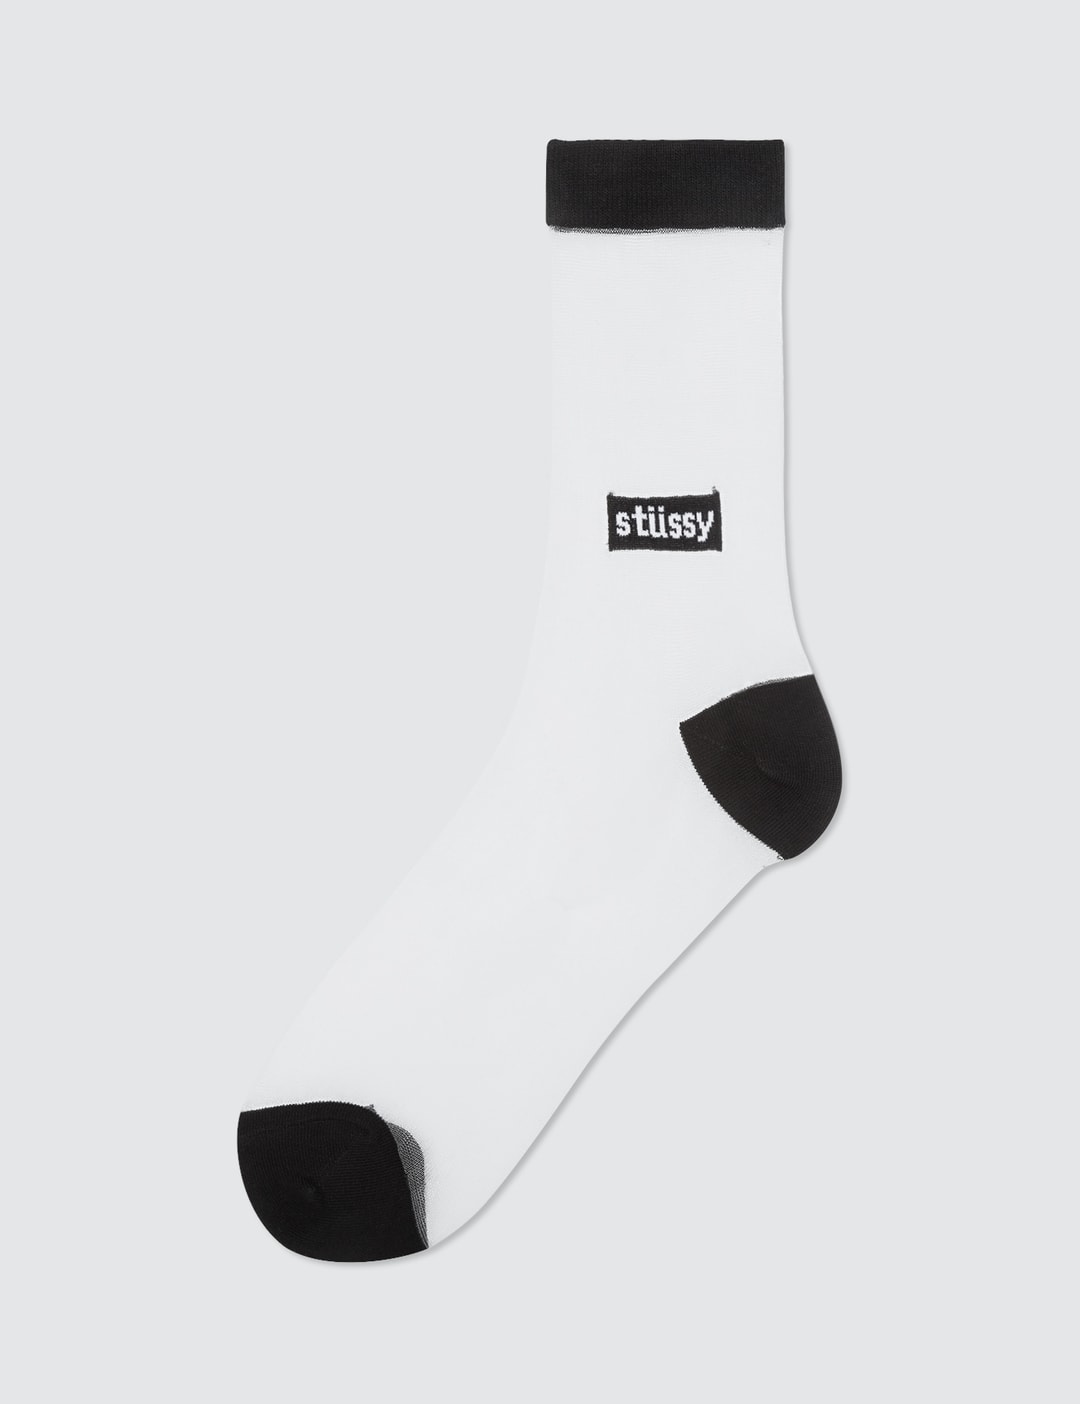 Stüssy - Mesh Knee Socks | HBX - Globally Curated Fashion and Lifestyle ...